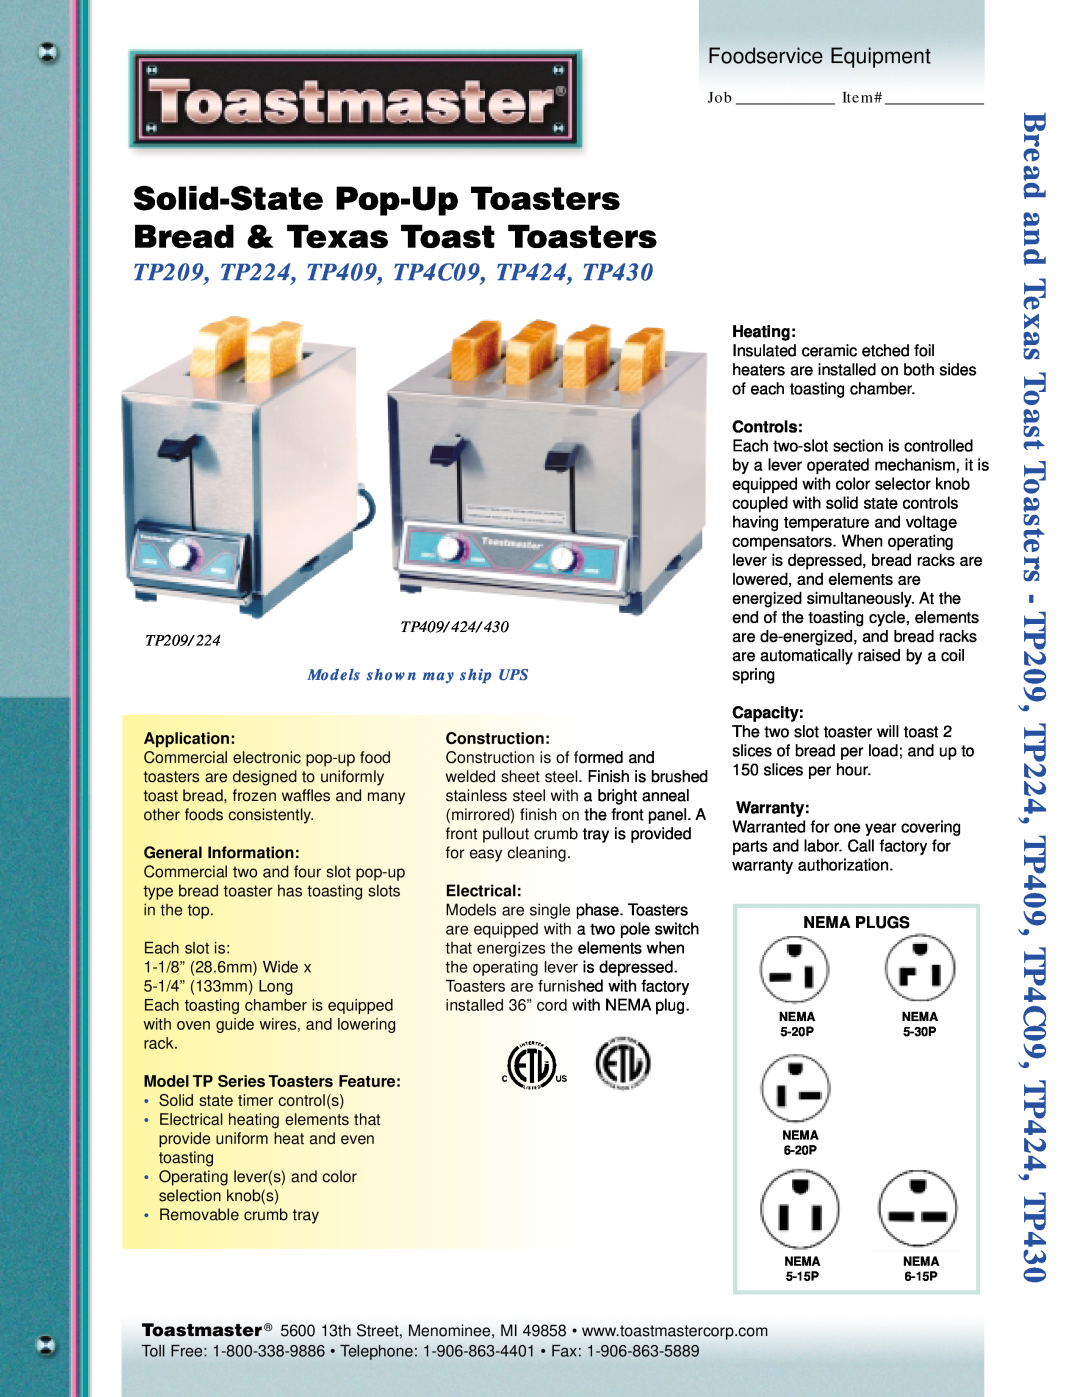 Toastmaster TP4C09, TP430 warranty TP409/424/430 TP209/224, Bread and Texas Toast Toasters - TP209, Foodservice Equipment 